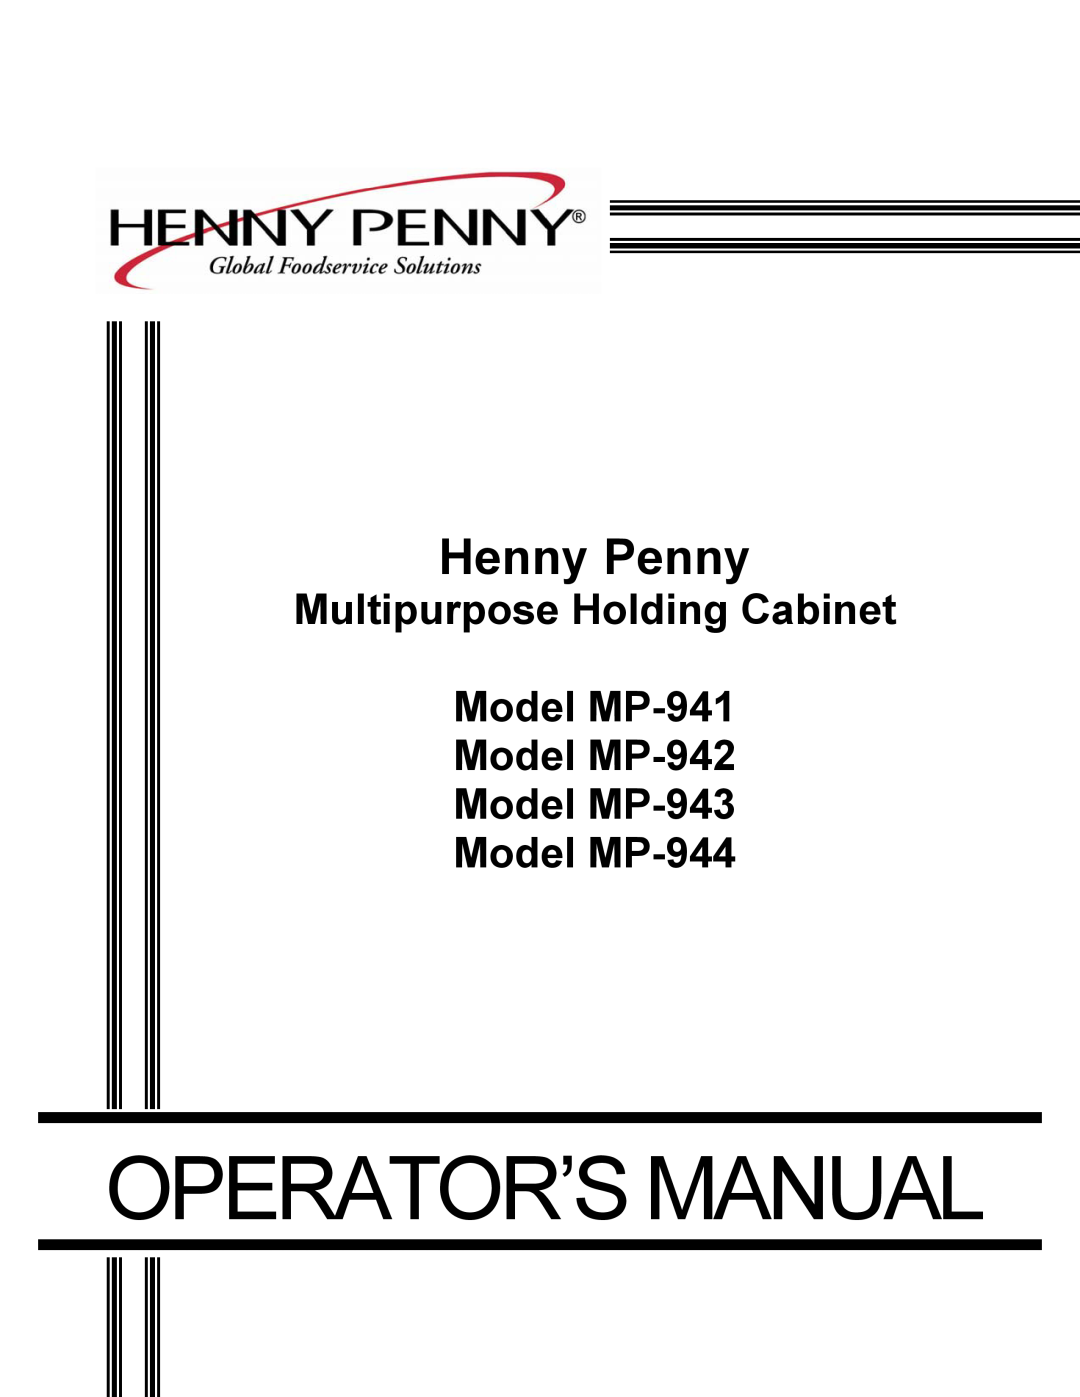 Henny Penny MP-943, MP-944, MP-942 manual Operator’S Manual, Henny Penny, Multipurpose Holding Cabinet Model MP-941 